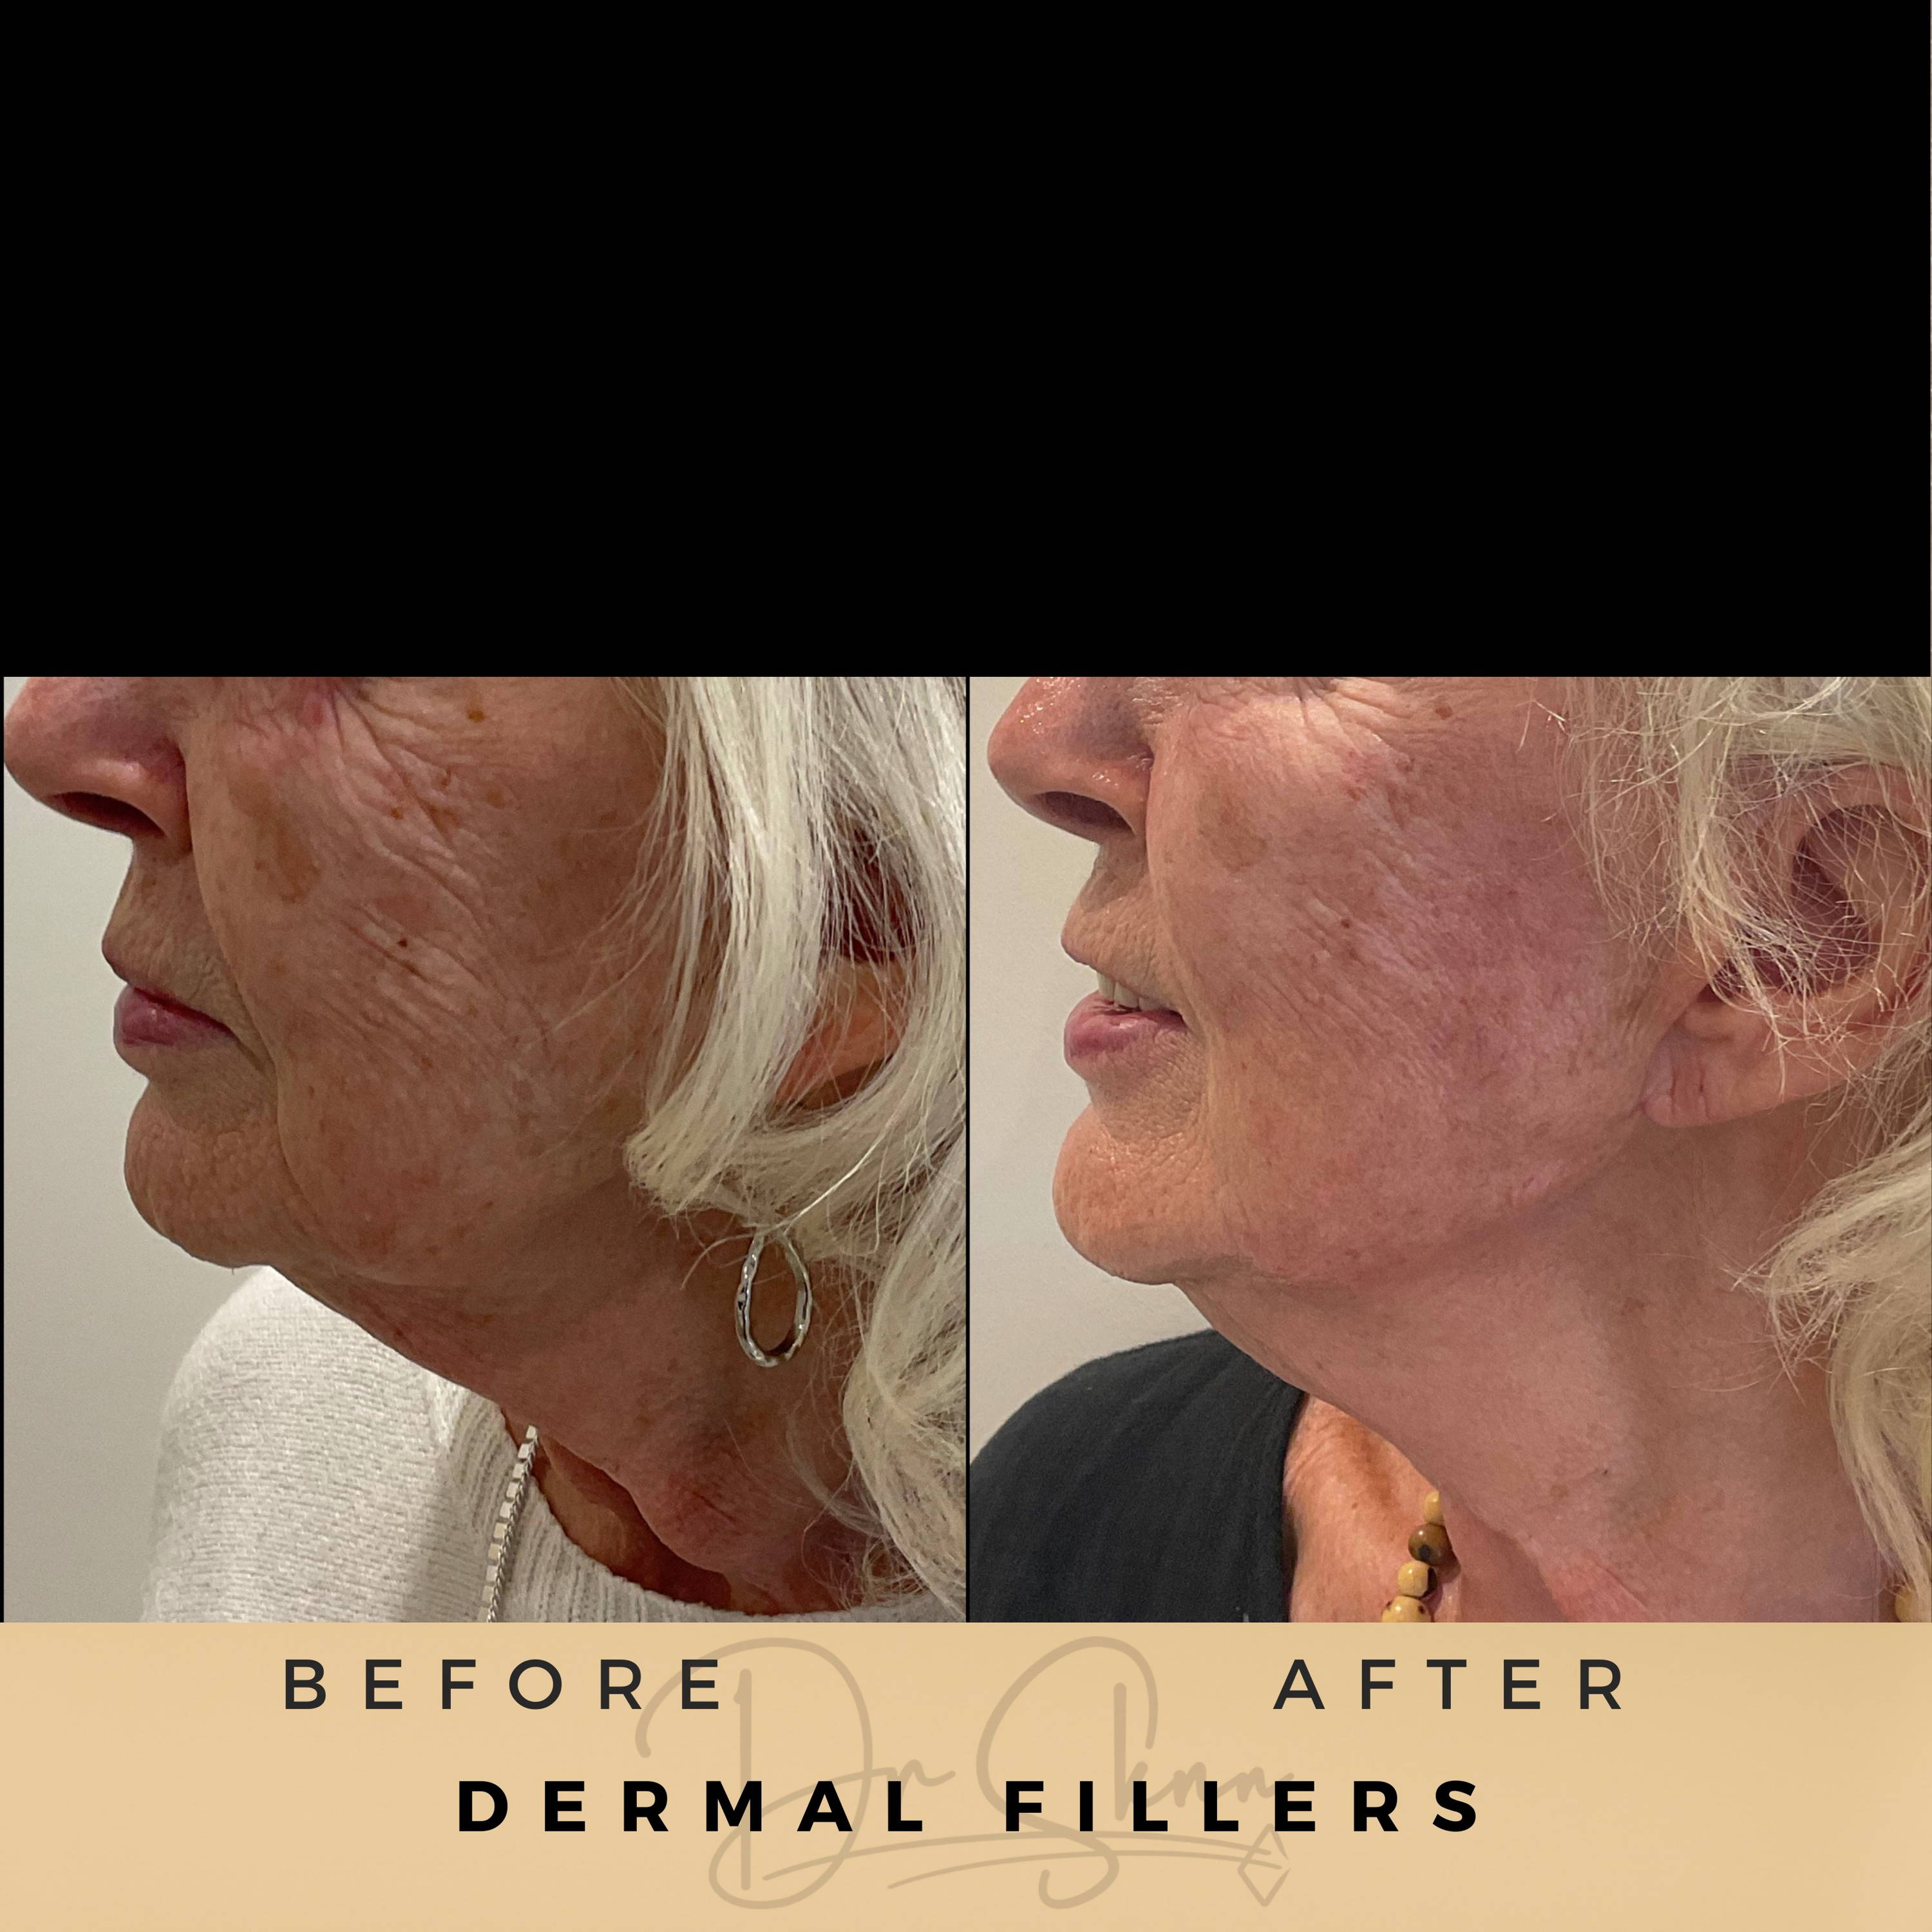 Jawline Fillers Wilmslow Before & After Dr Sknn